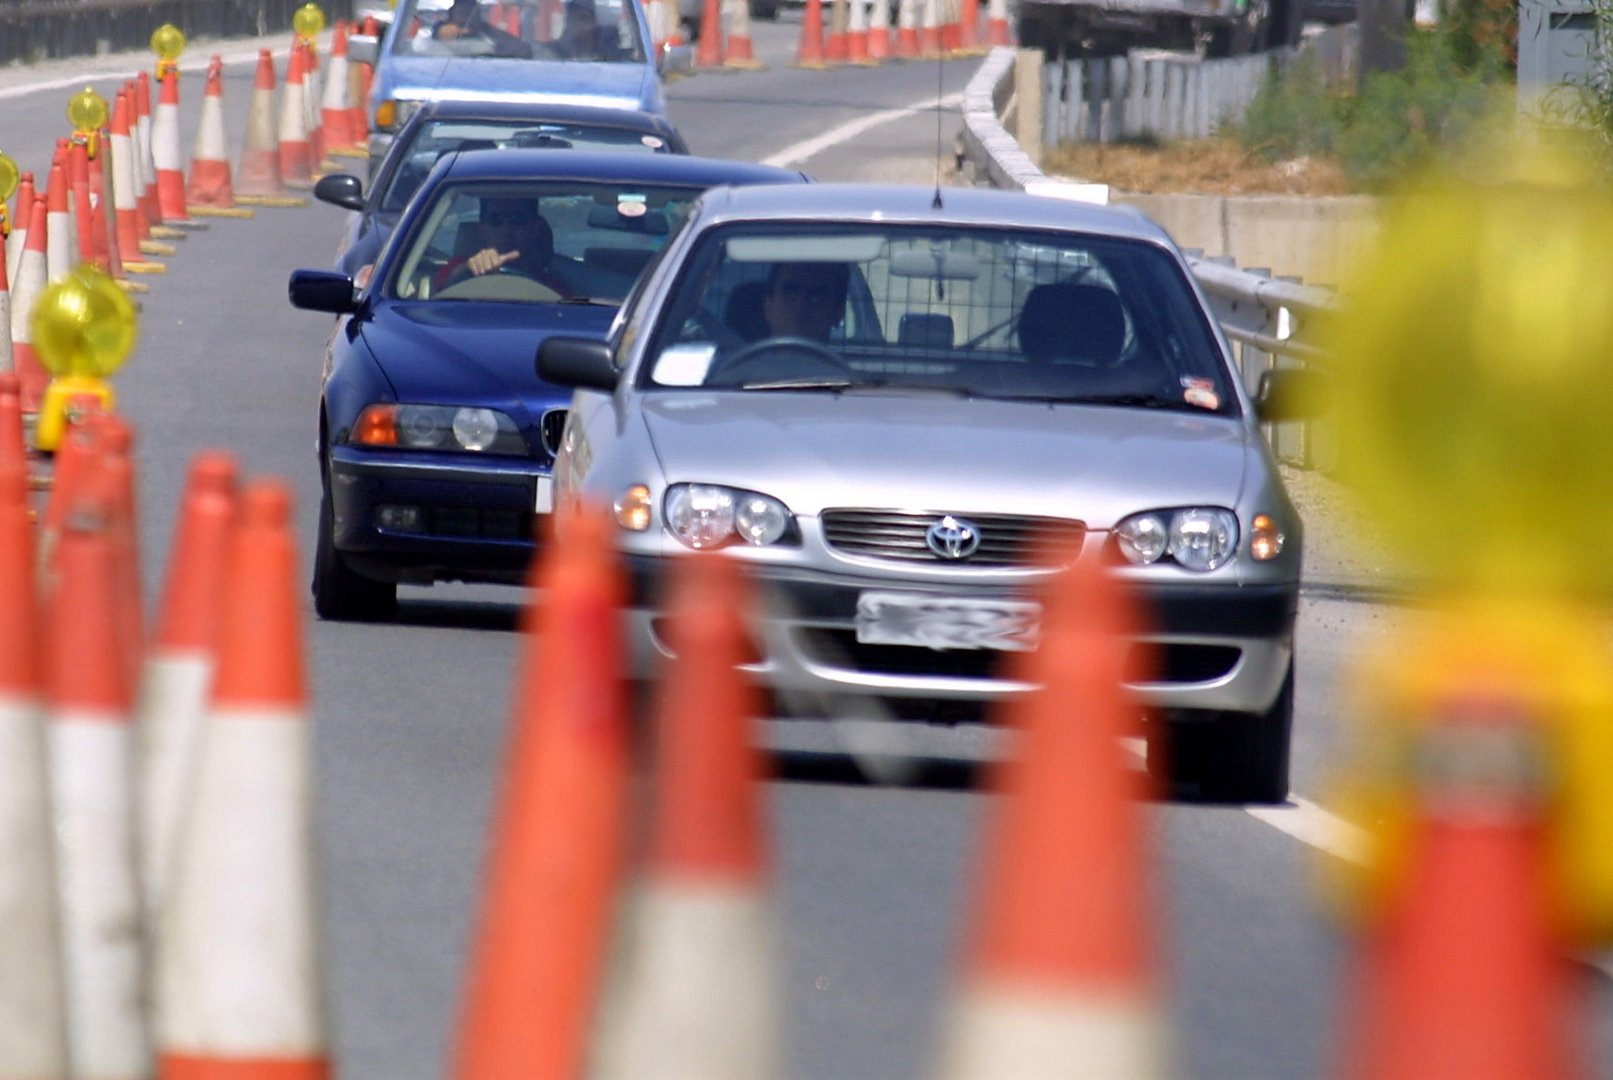 image Our View: Lowering urban speed limits – safety measure or driver torture?